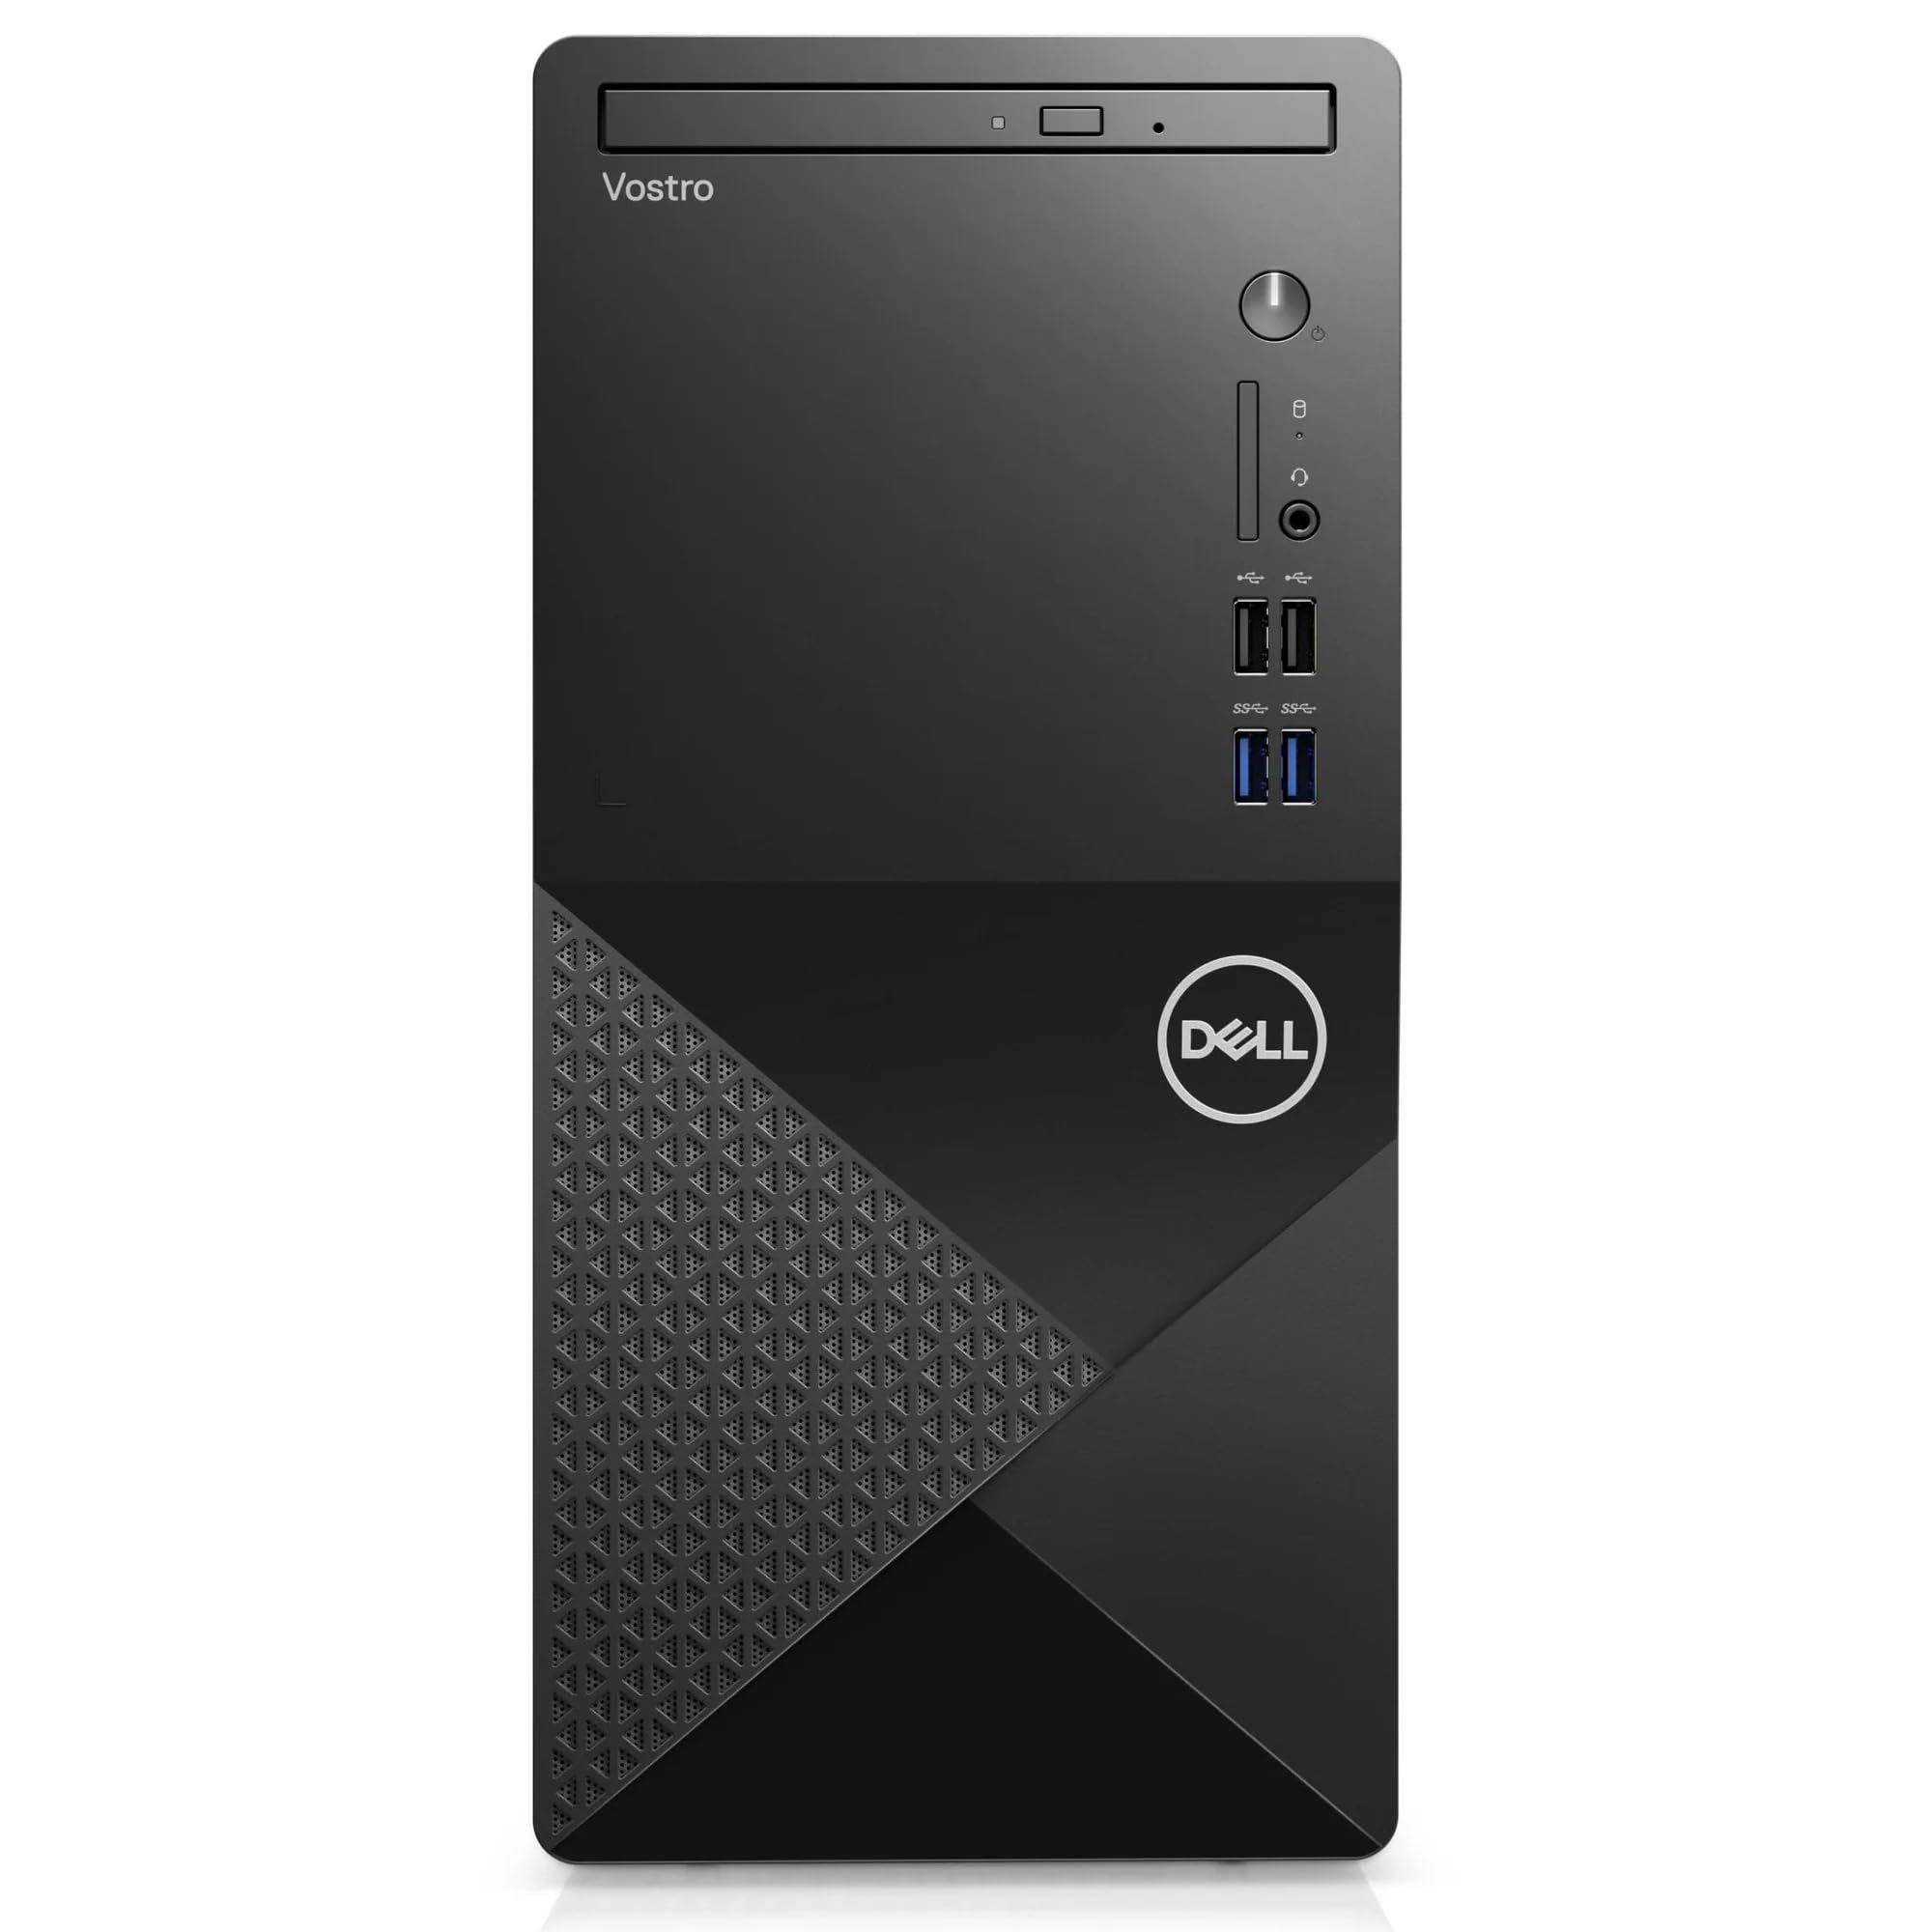 Dell 2023 Vostro 3910 Full Size Tower Business Desktop, 12th Gen Intel 12-Core i7-12700 up to 4.9GHz, 16GB DDR4 RAM, 1TB PCIe SSD, AC WiFi, Bluetooth 5.0, Keyboard & Mouse, Windows 11 Pro